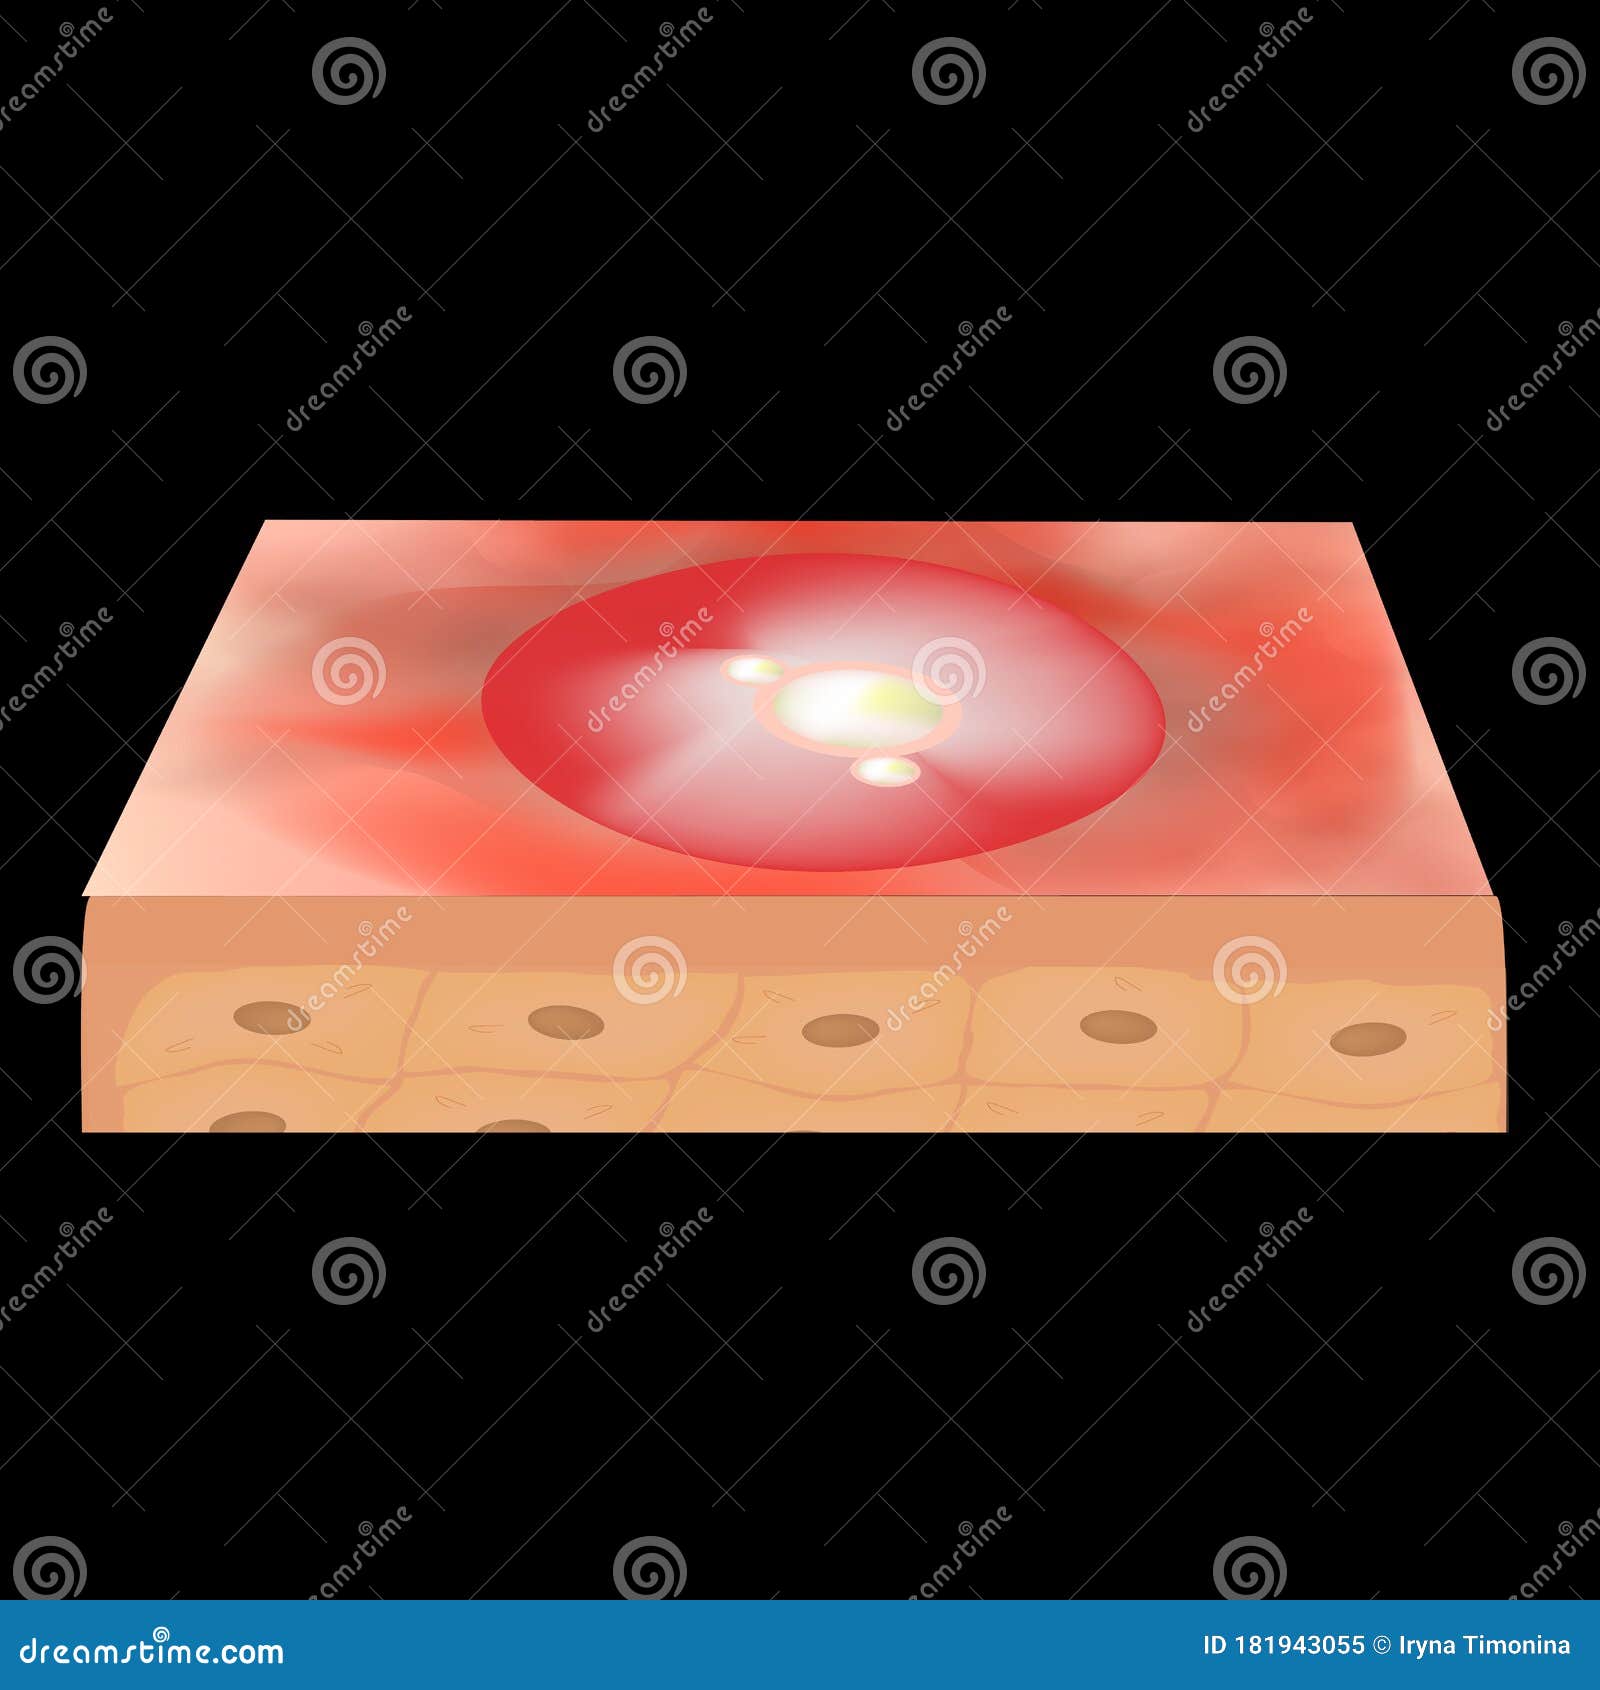 cyst acne. furuncle acne on the skin cysts and pimples. dermatological and cosmetic inflammatory diseases on the skin of